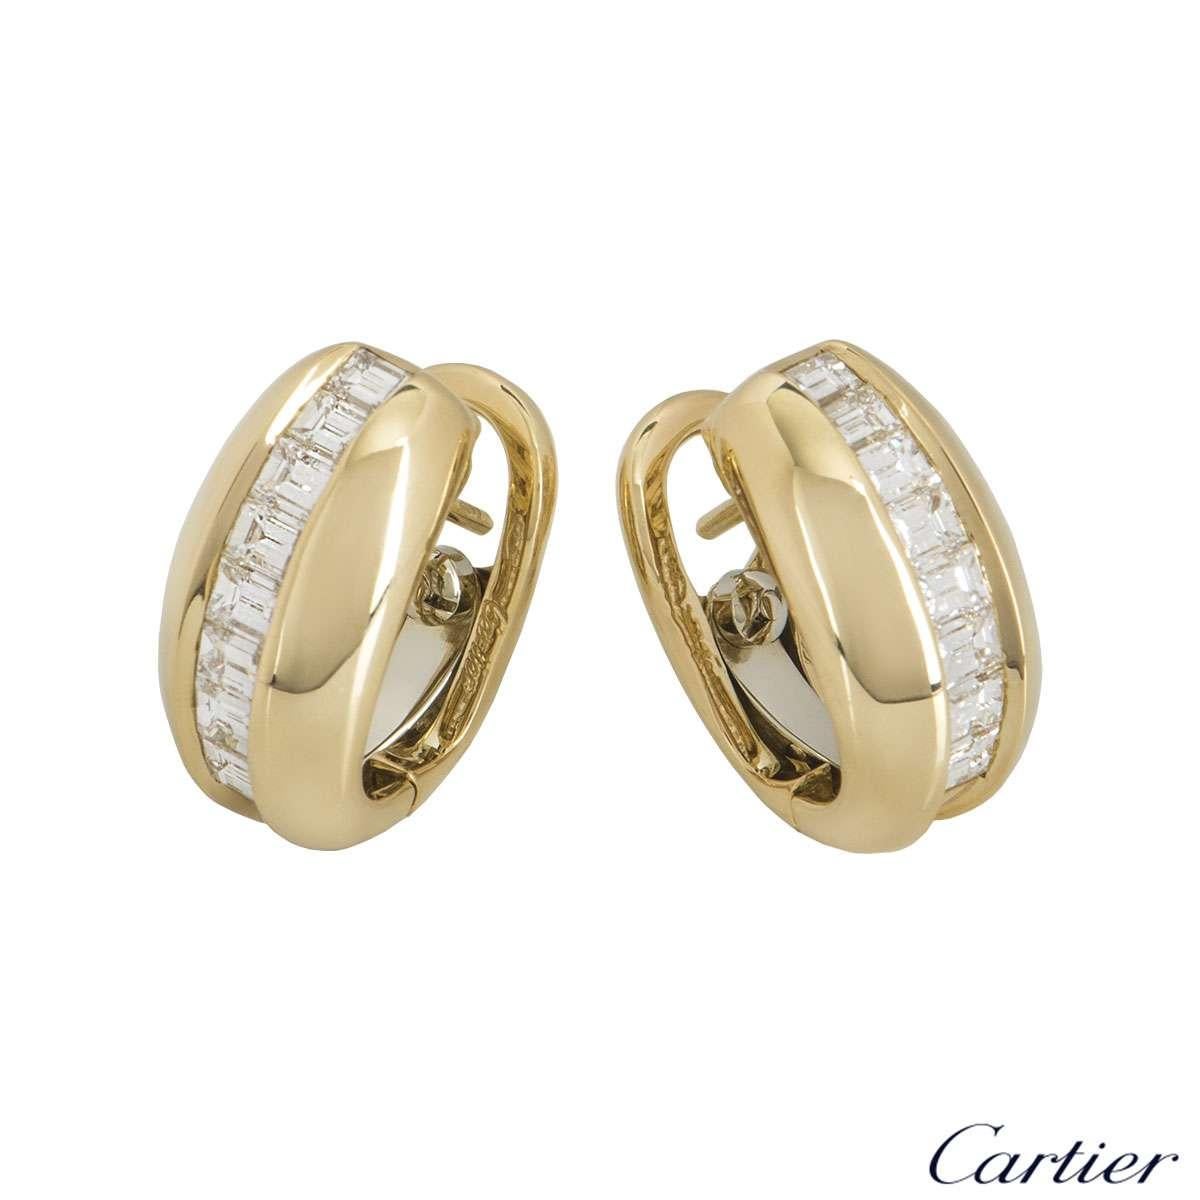 A pair of 18k yellow gold Bombe style earrings by Cartier. The earrings are each set with 8 baguette cut diamonds, totalling approximately 1.44ct. The earrings measure 1.8cm in length and feature post and hinge clip fittings, with a gross weight of